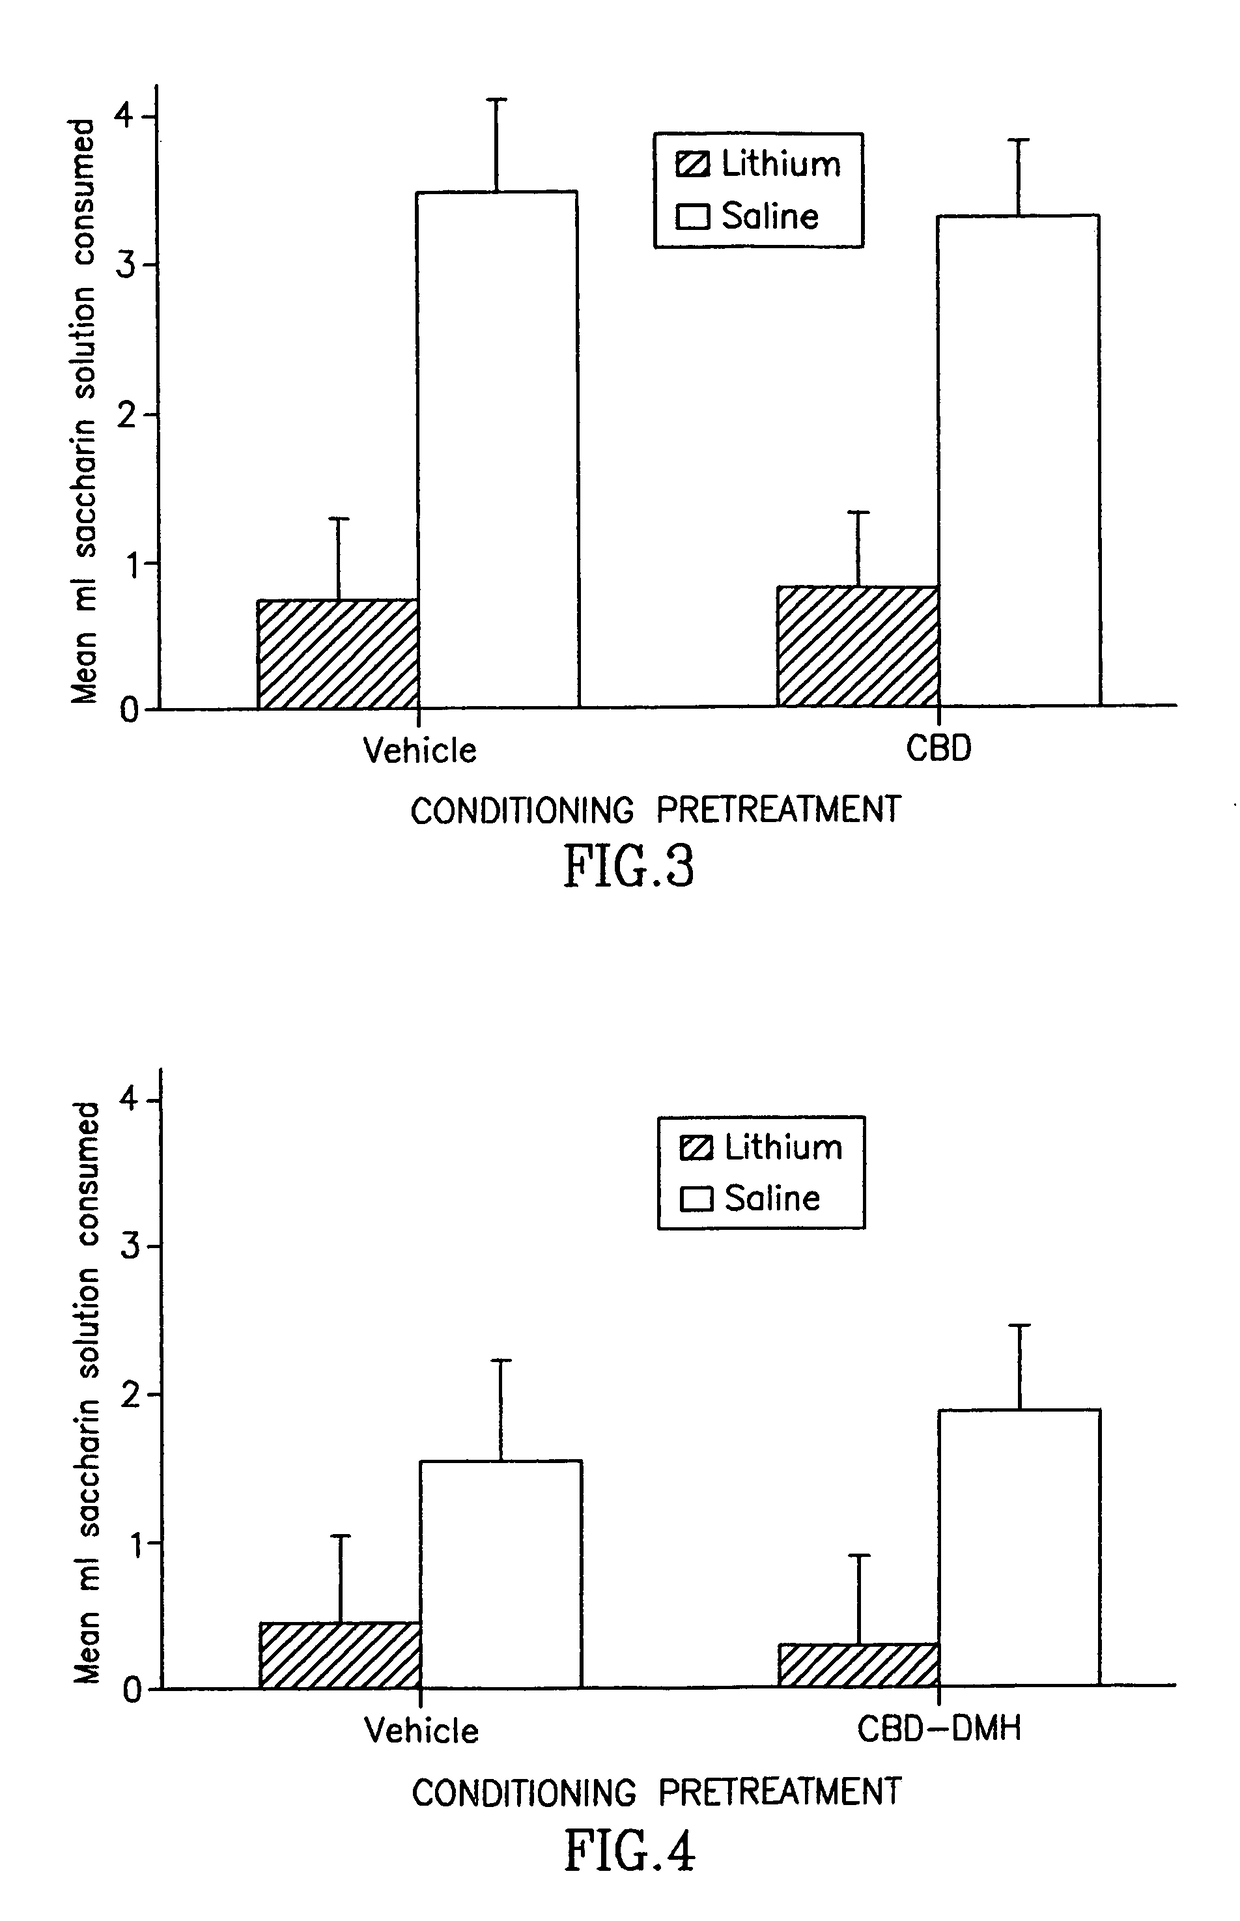 Anti-nausea and anti-vomiting activity of cannabidiol compounds